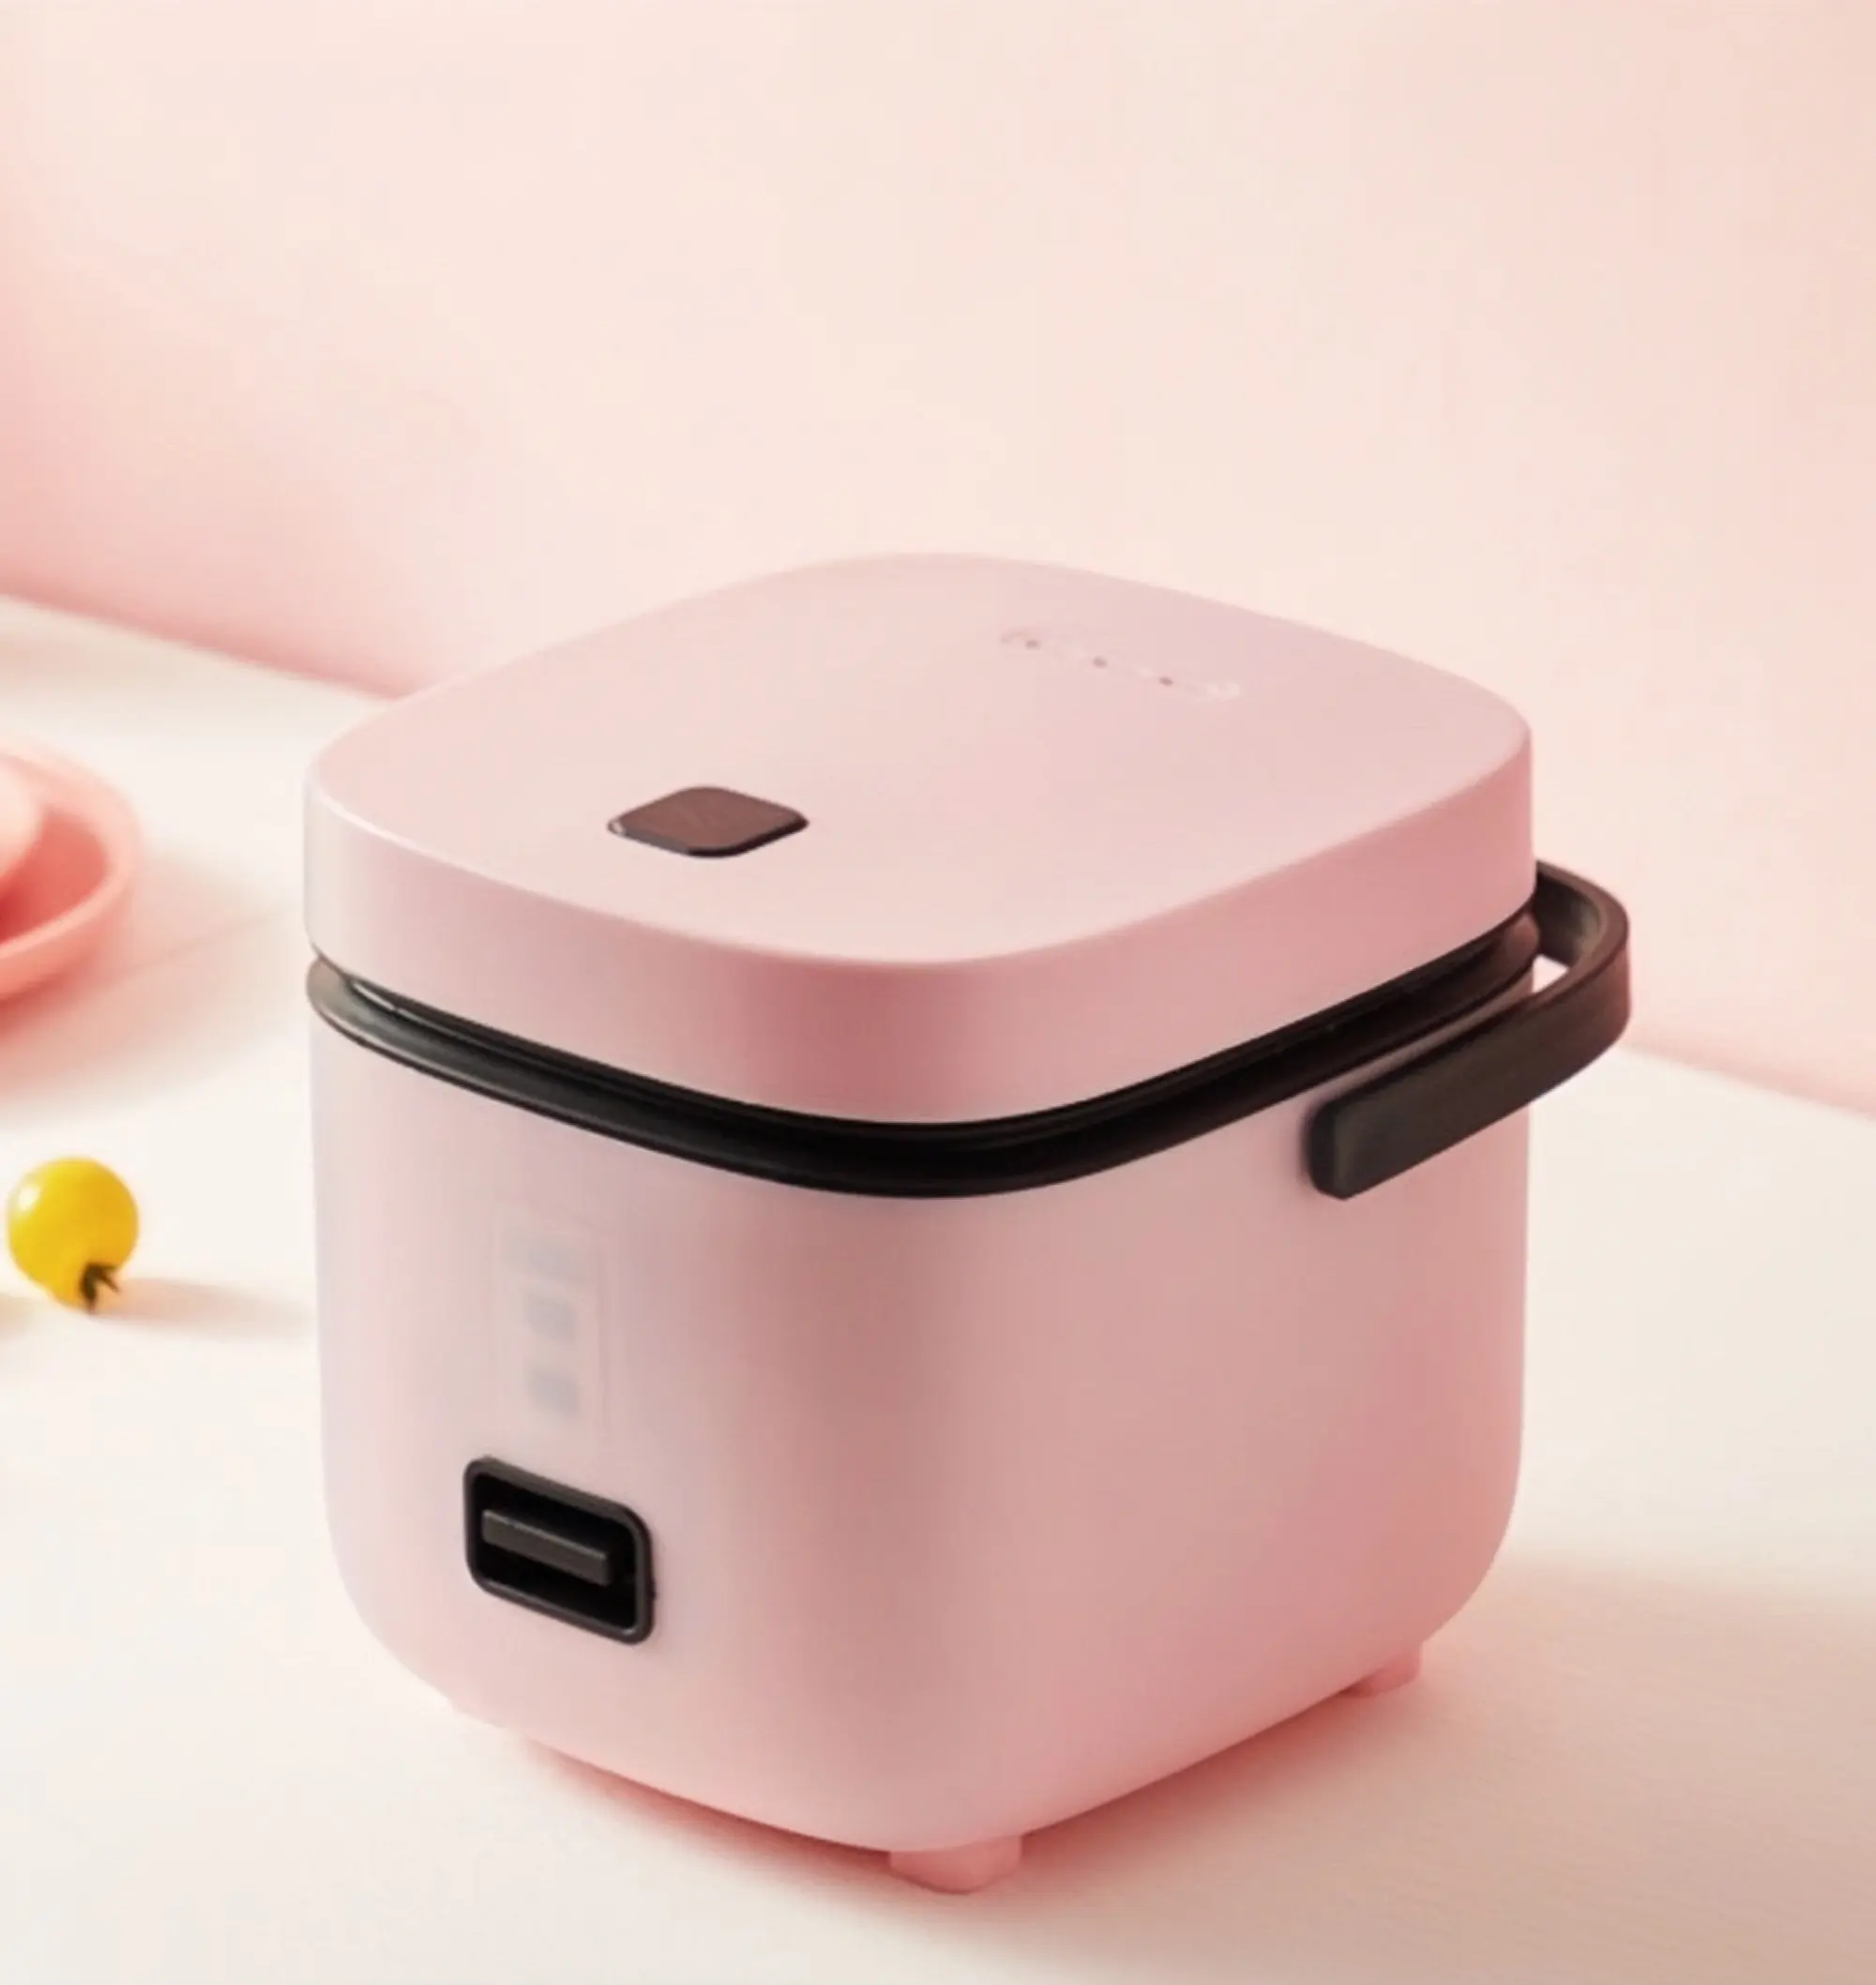 Factory Price Portable Personal 1.2L Rice Cookers Electric Mini Rice Cooker With Removable Nonstick Pot